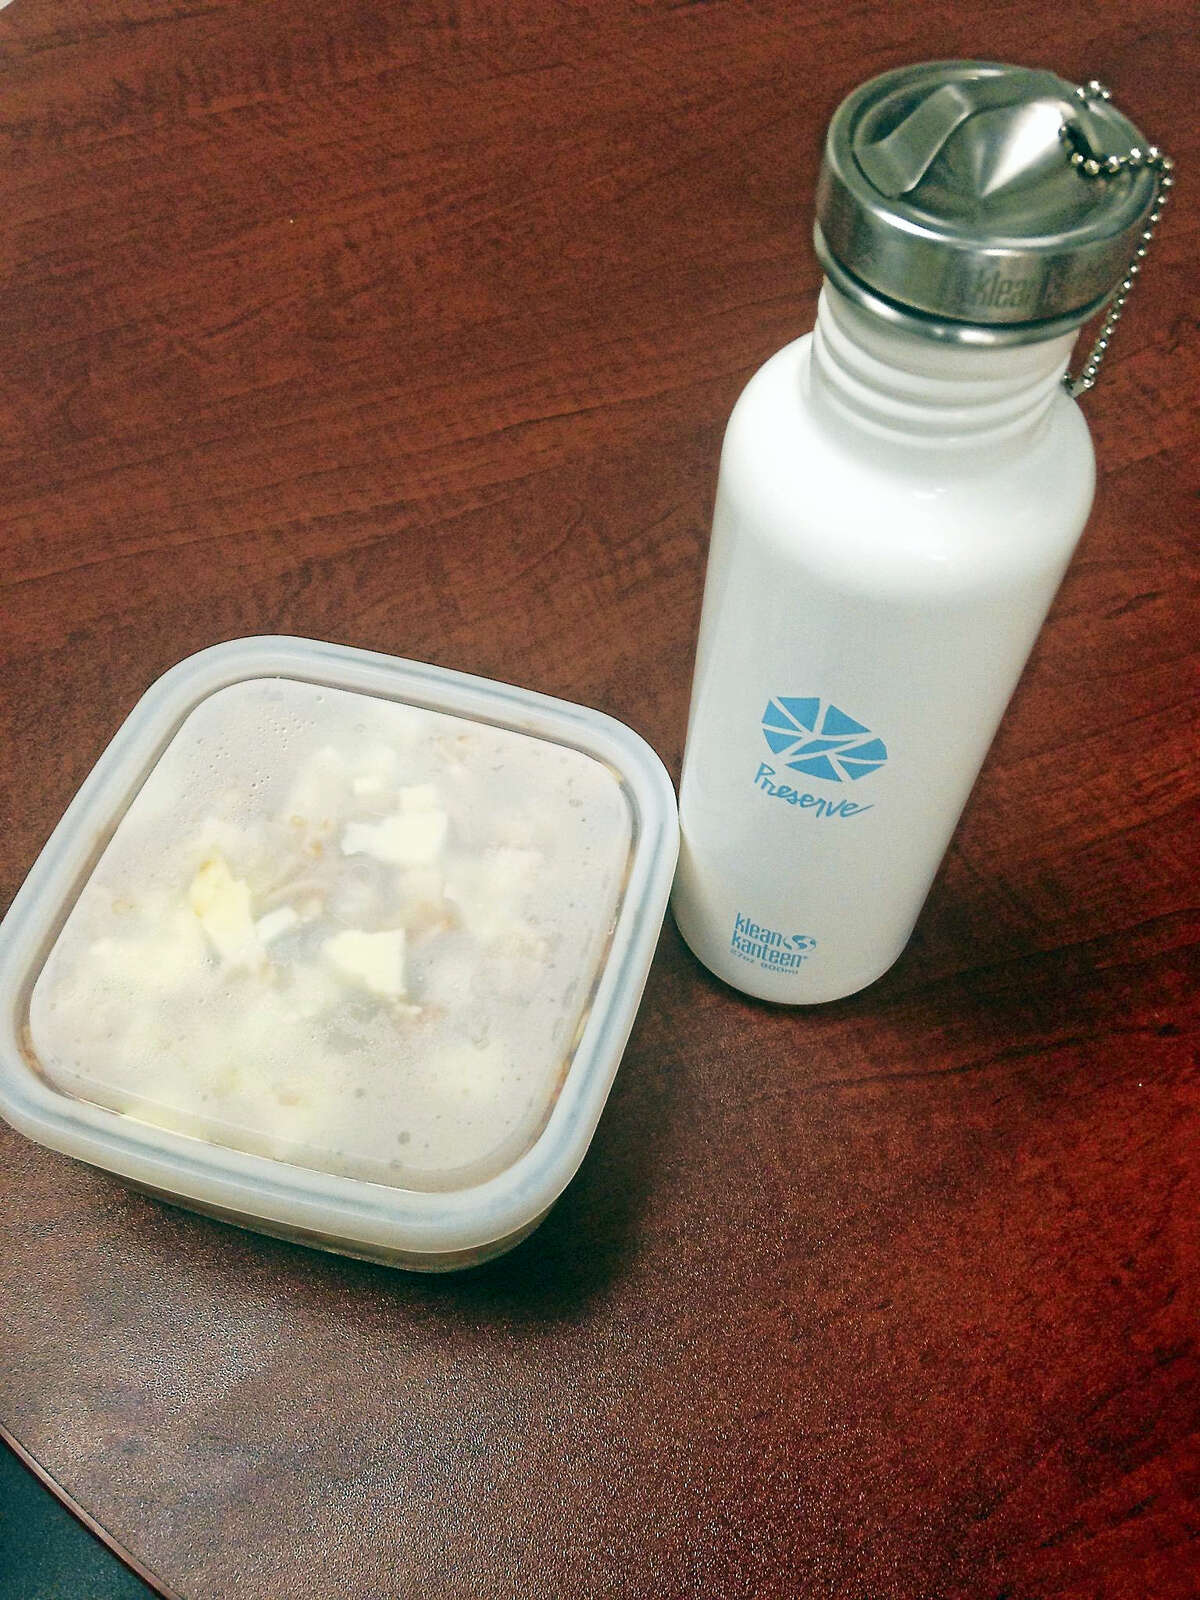 Packing my lunch in tupperware instead of plastic bags helps eliminate waste. On today's menu is leftover pasta in a microwave-safe glass tupperware. A reusable water bottle also helps eliminate waste in my life. (Anna Bisaro - New Haven Register)